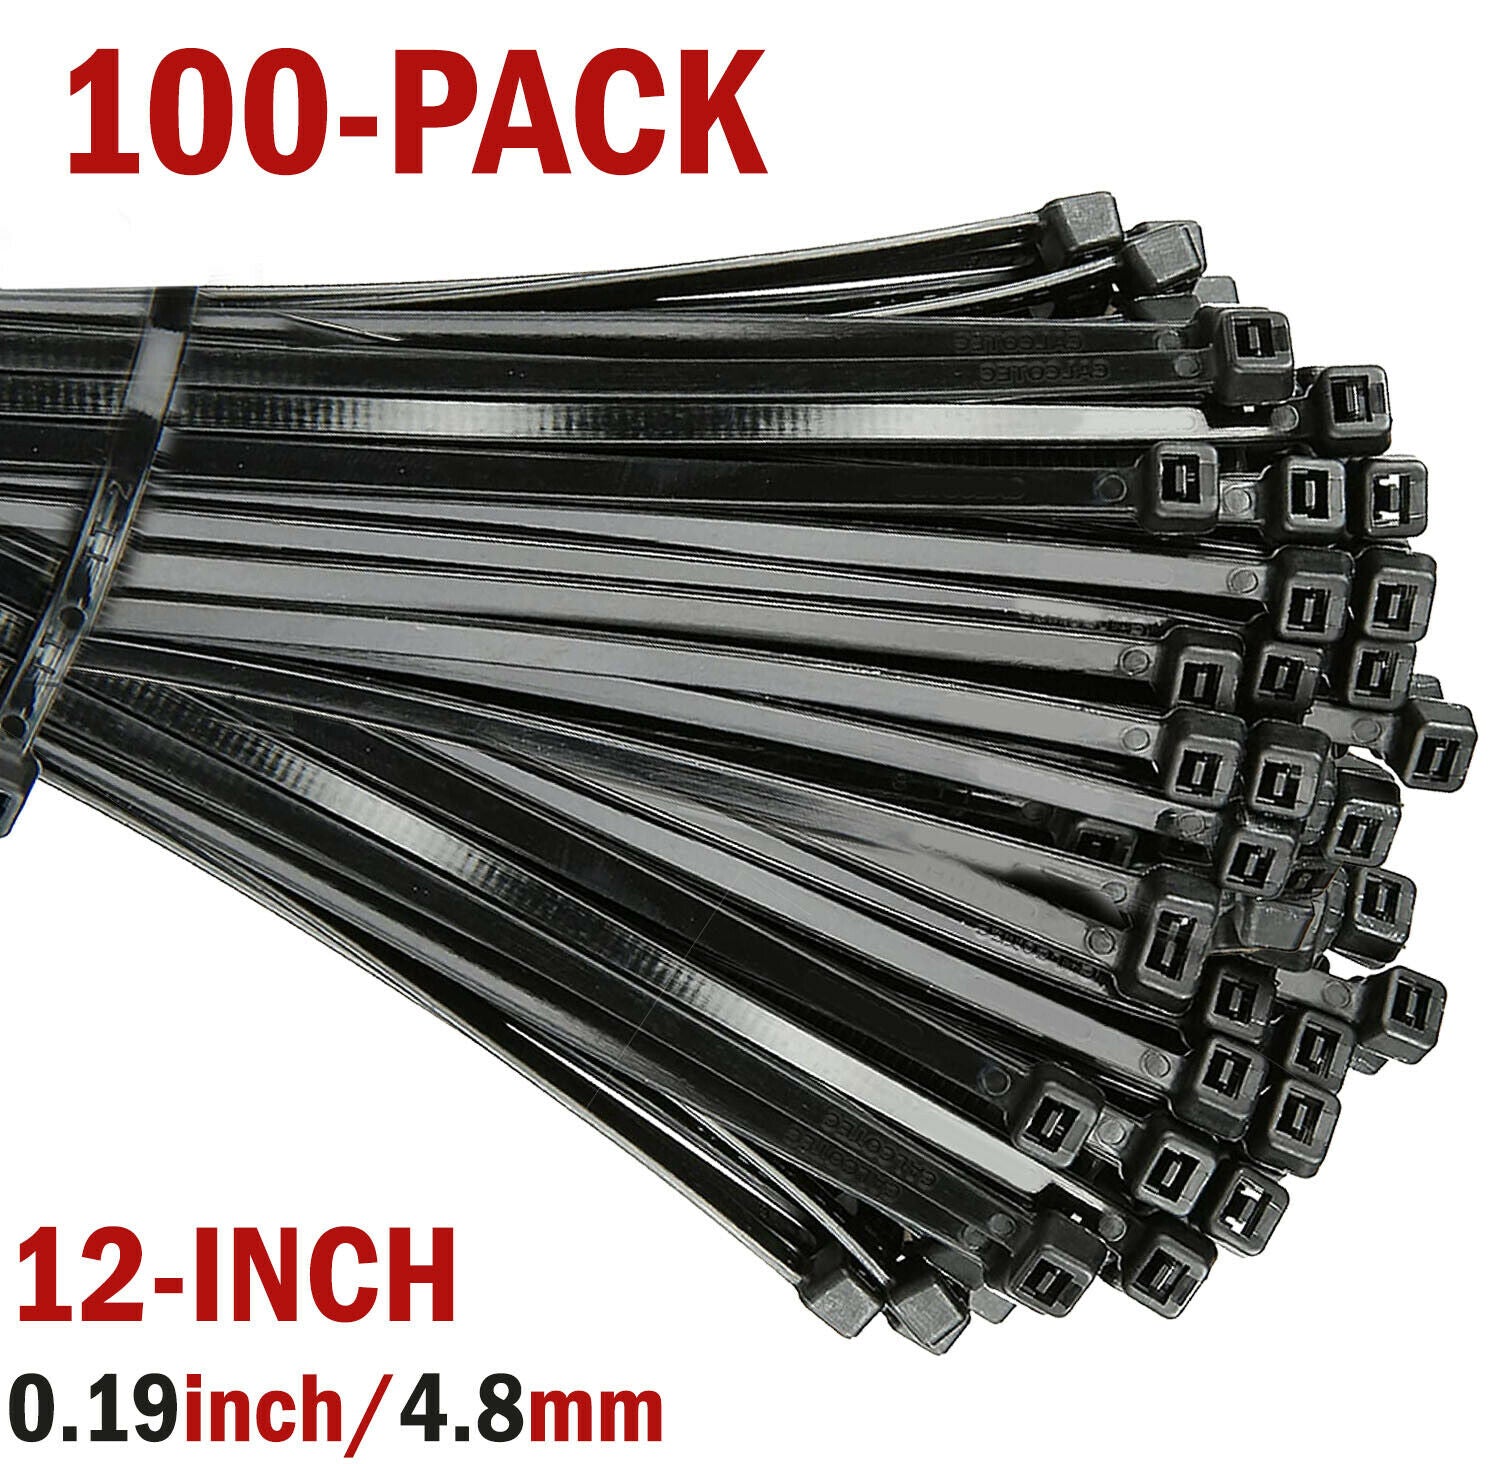 100 Cable Zip Ties 12 Inch Long Cable Ties Super Strong Nylon Cord Wrap Black